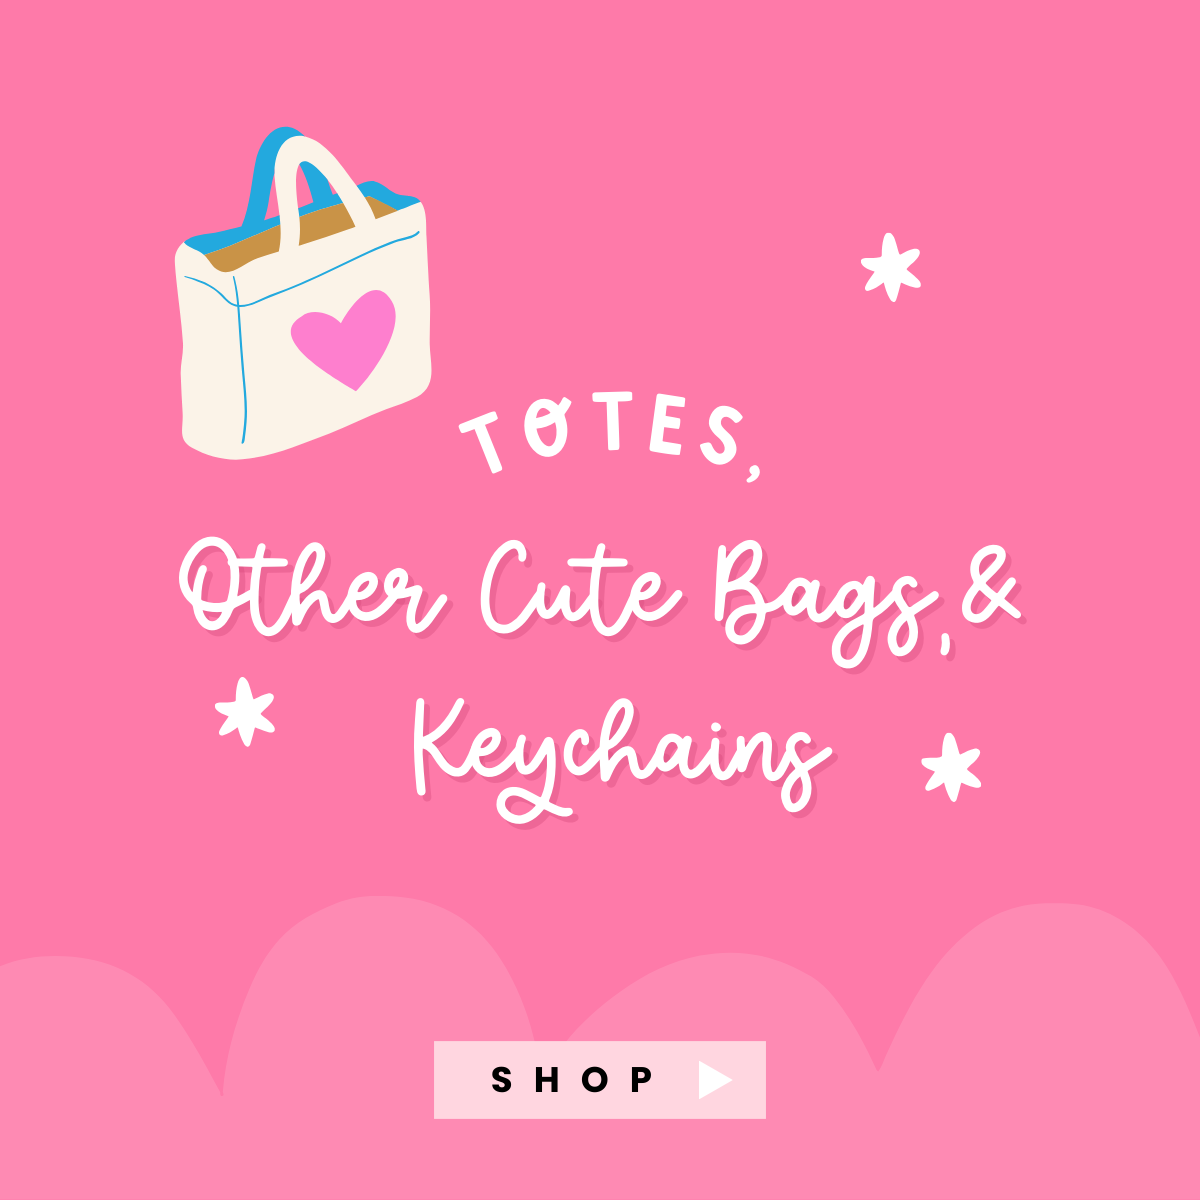 Totes, Other Cute Bags & Keychains